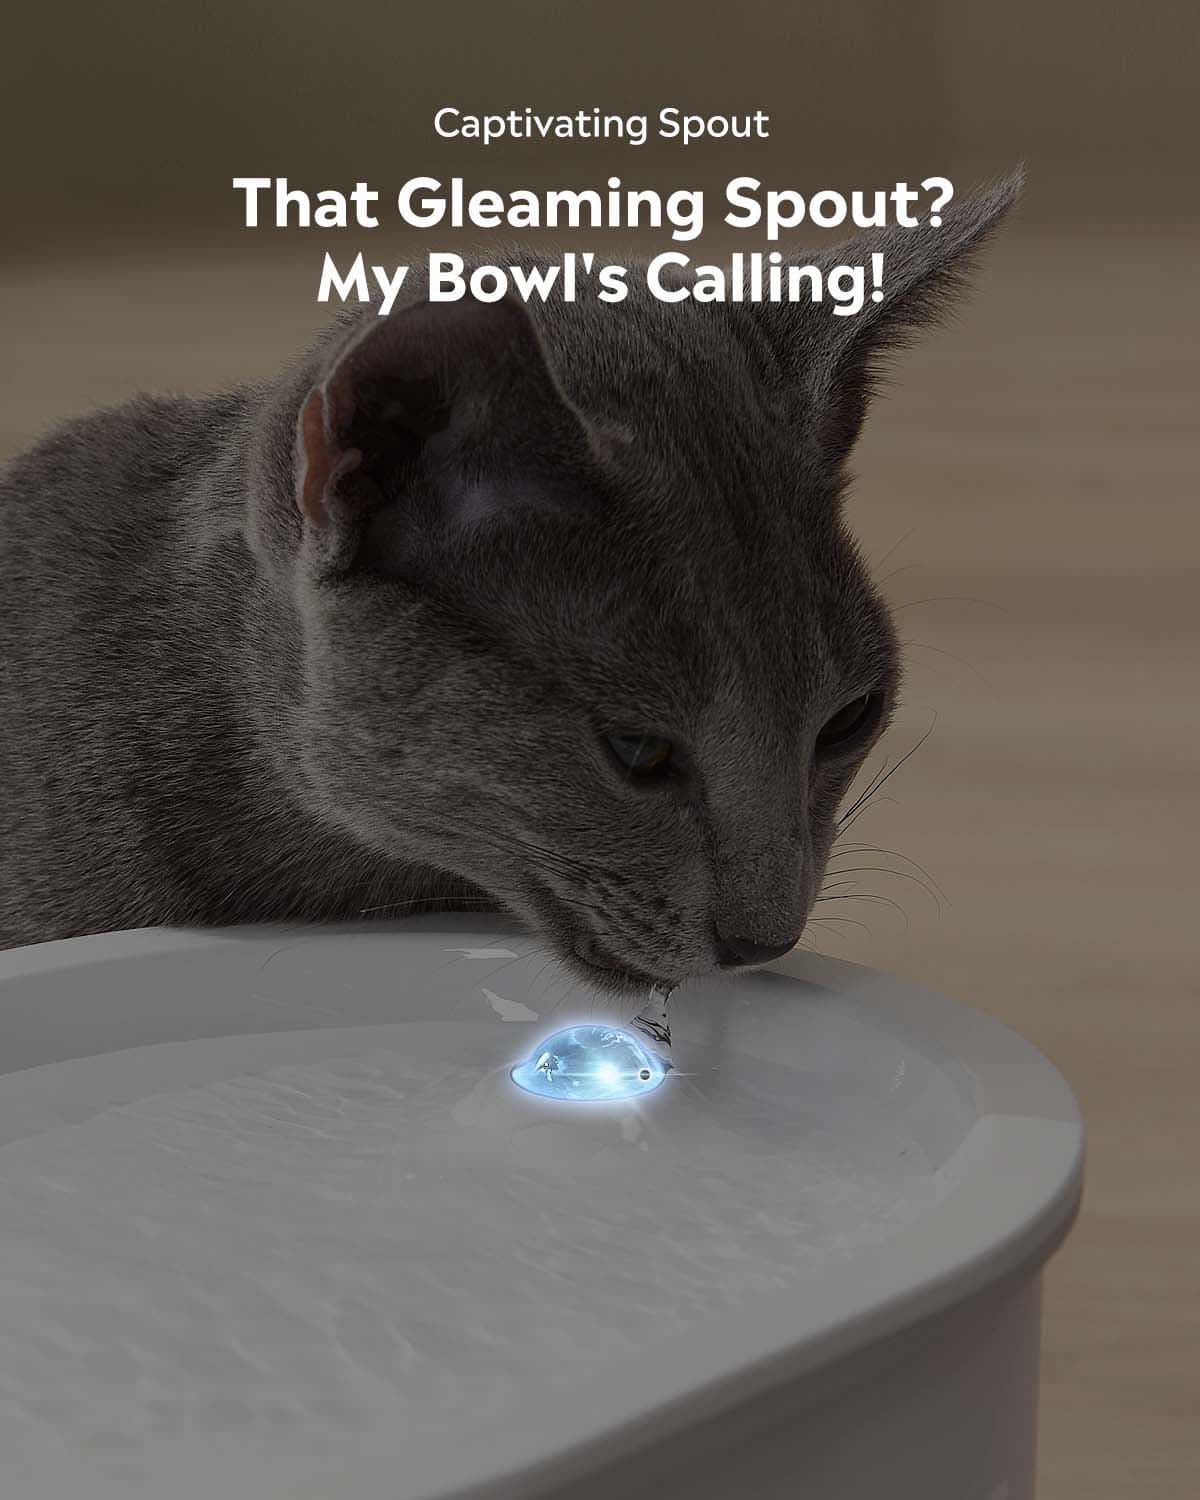 A cat is drinking water from Uahpet GLOW pet water fountain